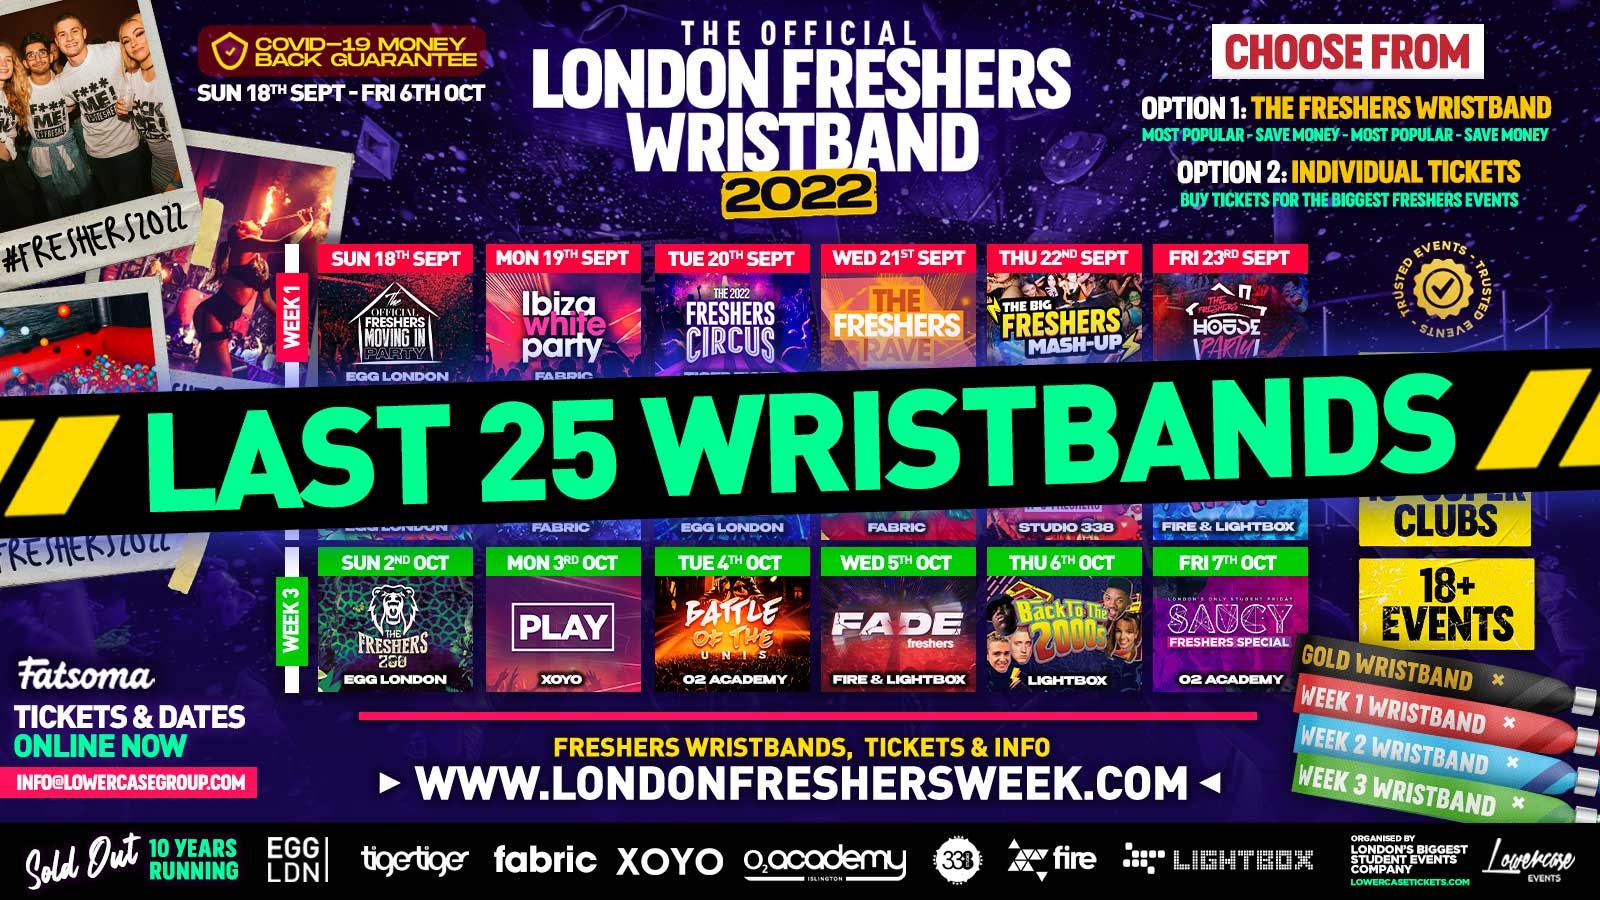 The Official London Freshers Wristband 2022 – 25 WRISTBANDS LEFT ⚠️